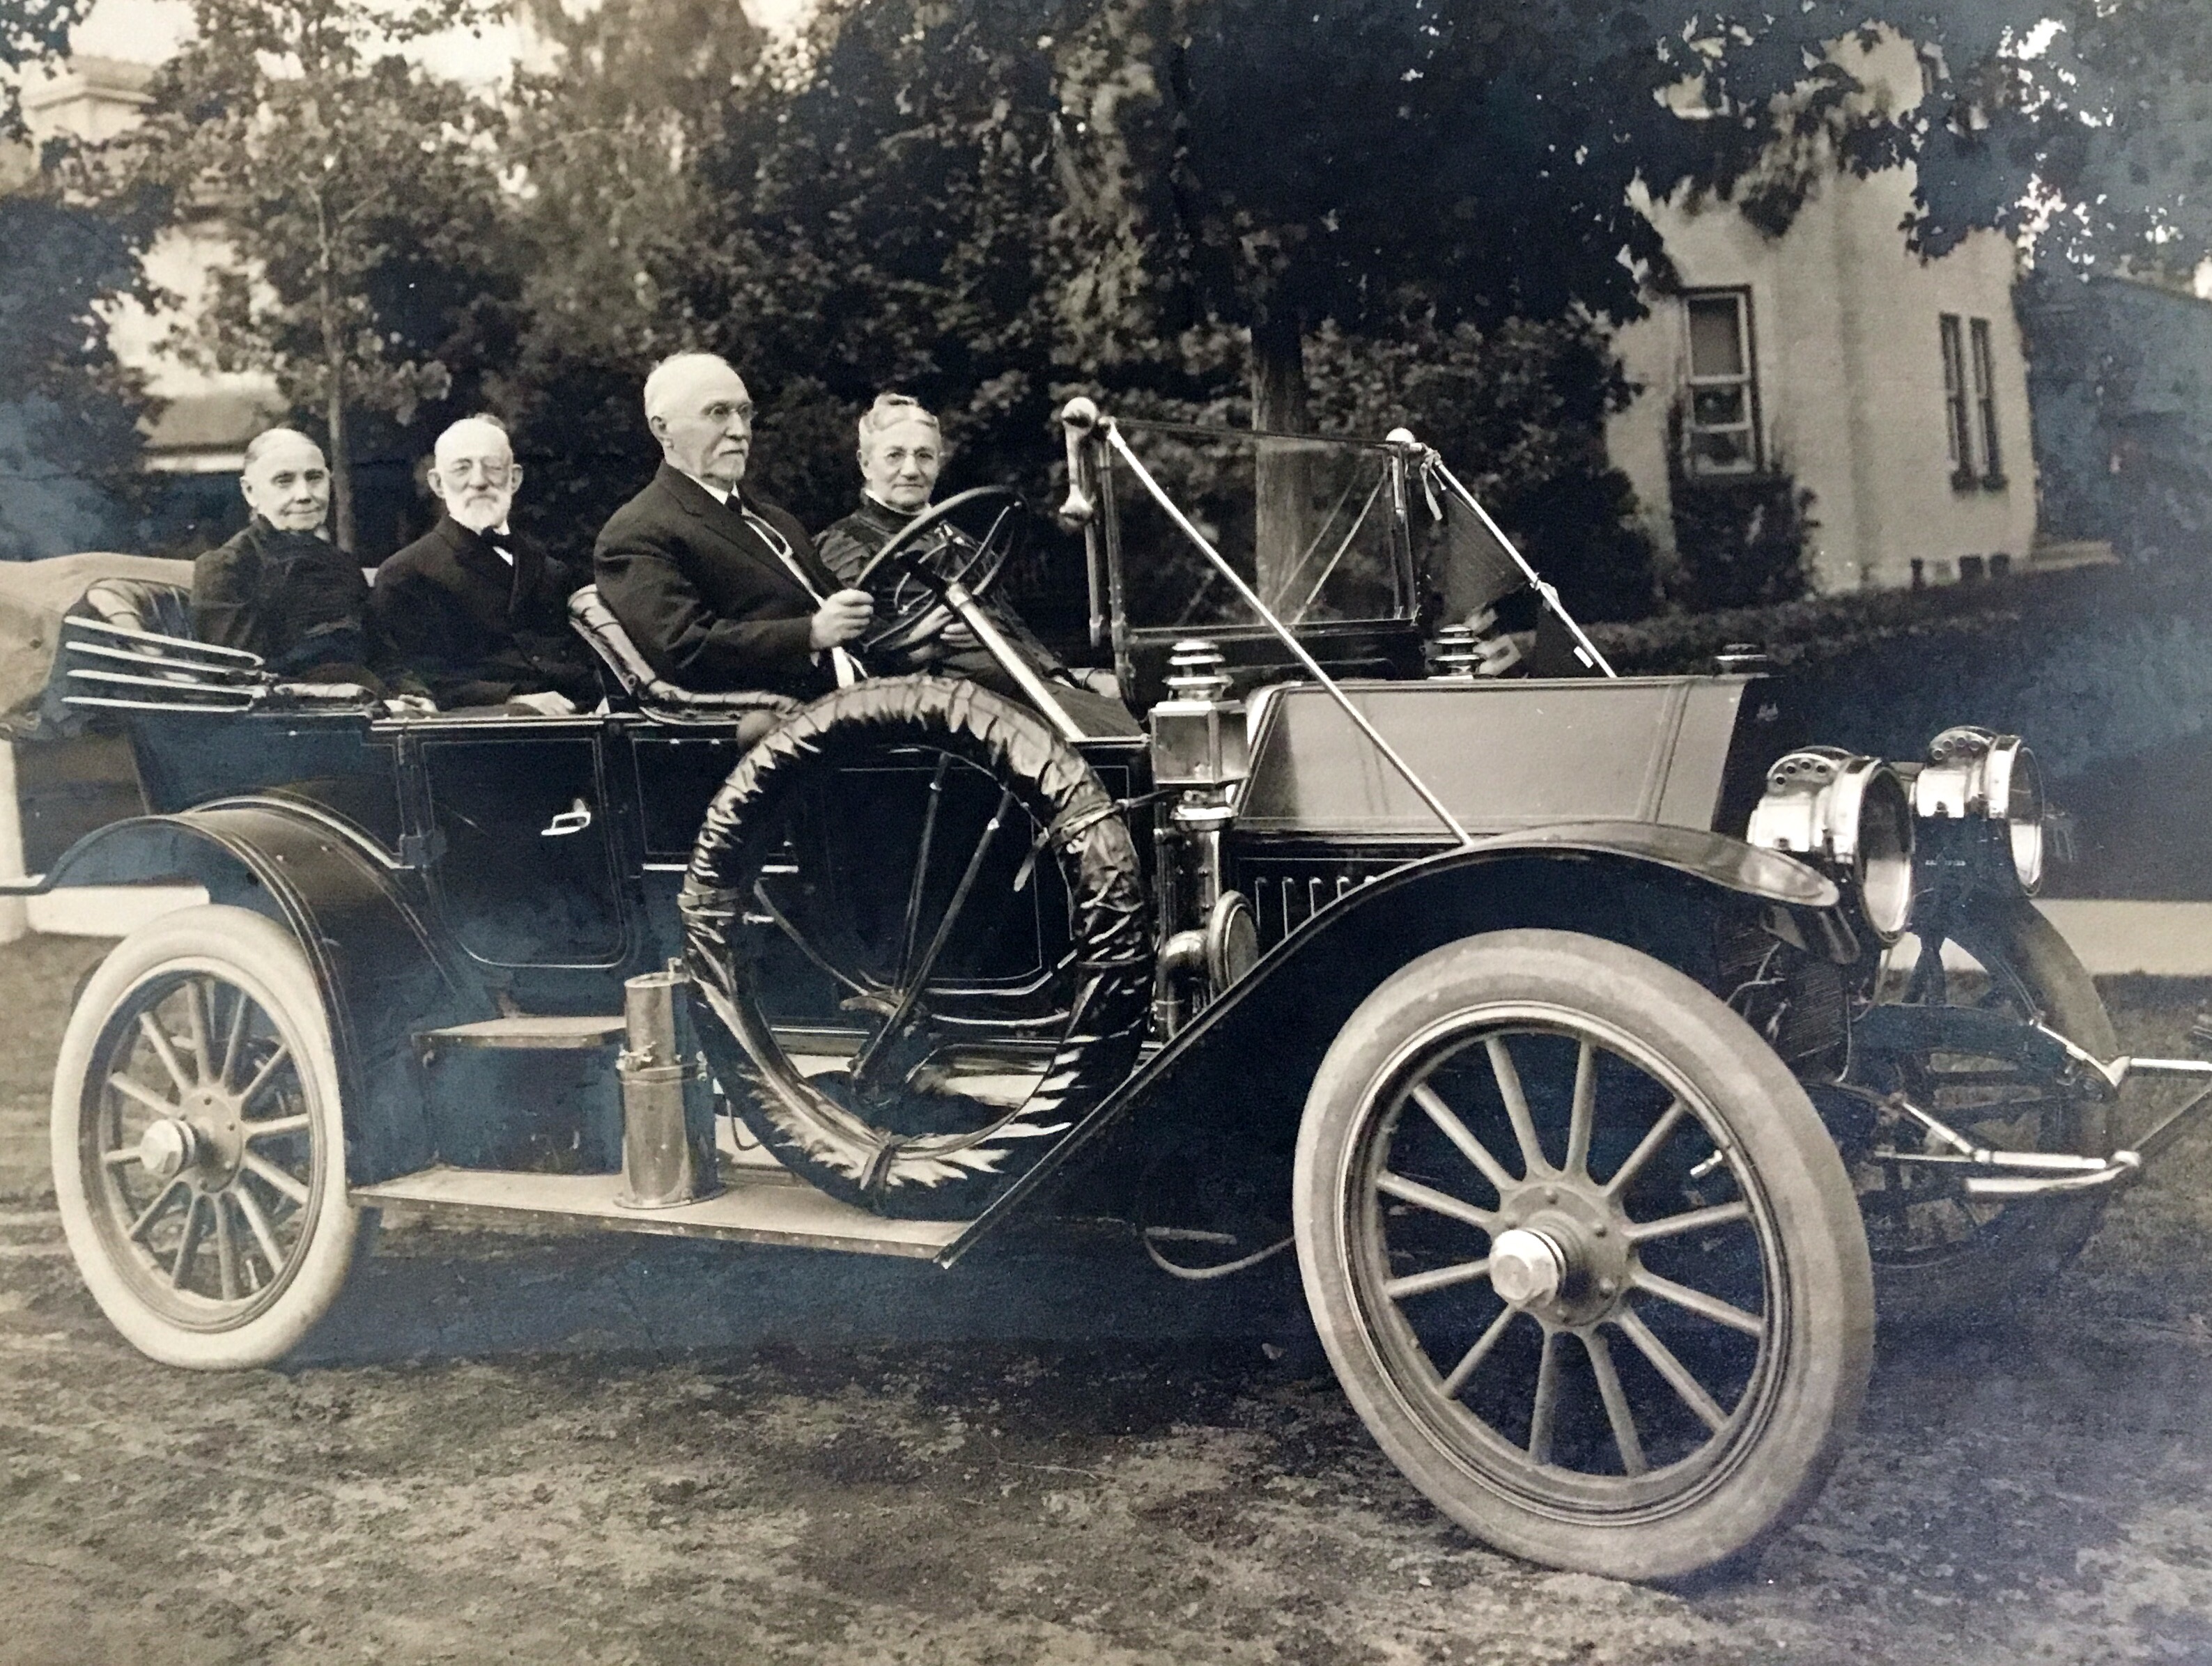 My great-great grandparents’ 60th wedding anniversary in 1911.  The car is a McLaughlin, the forerunner of the Buick car.
They are in the back and in the front is his sister and her brother, also married.